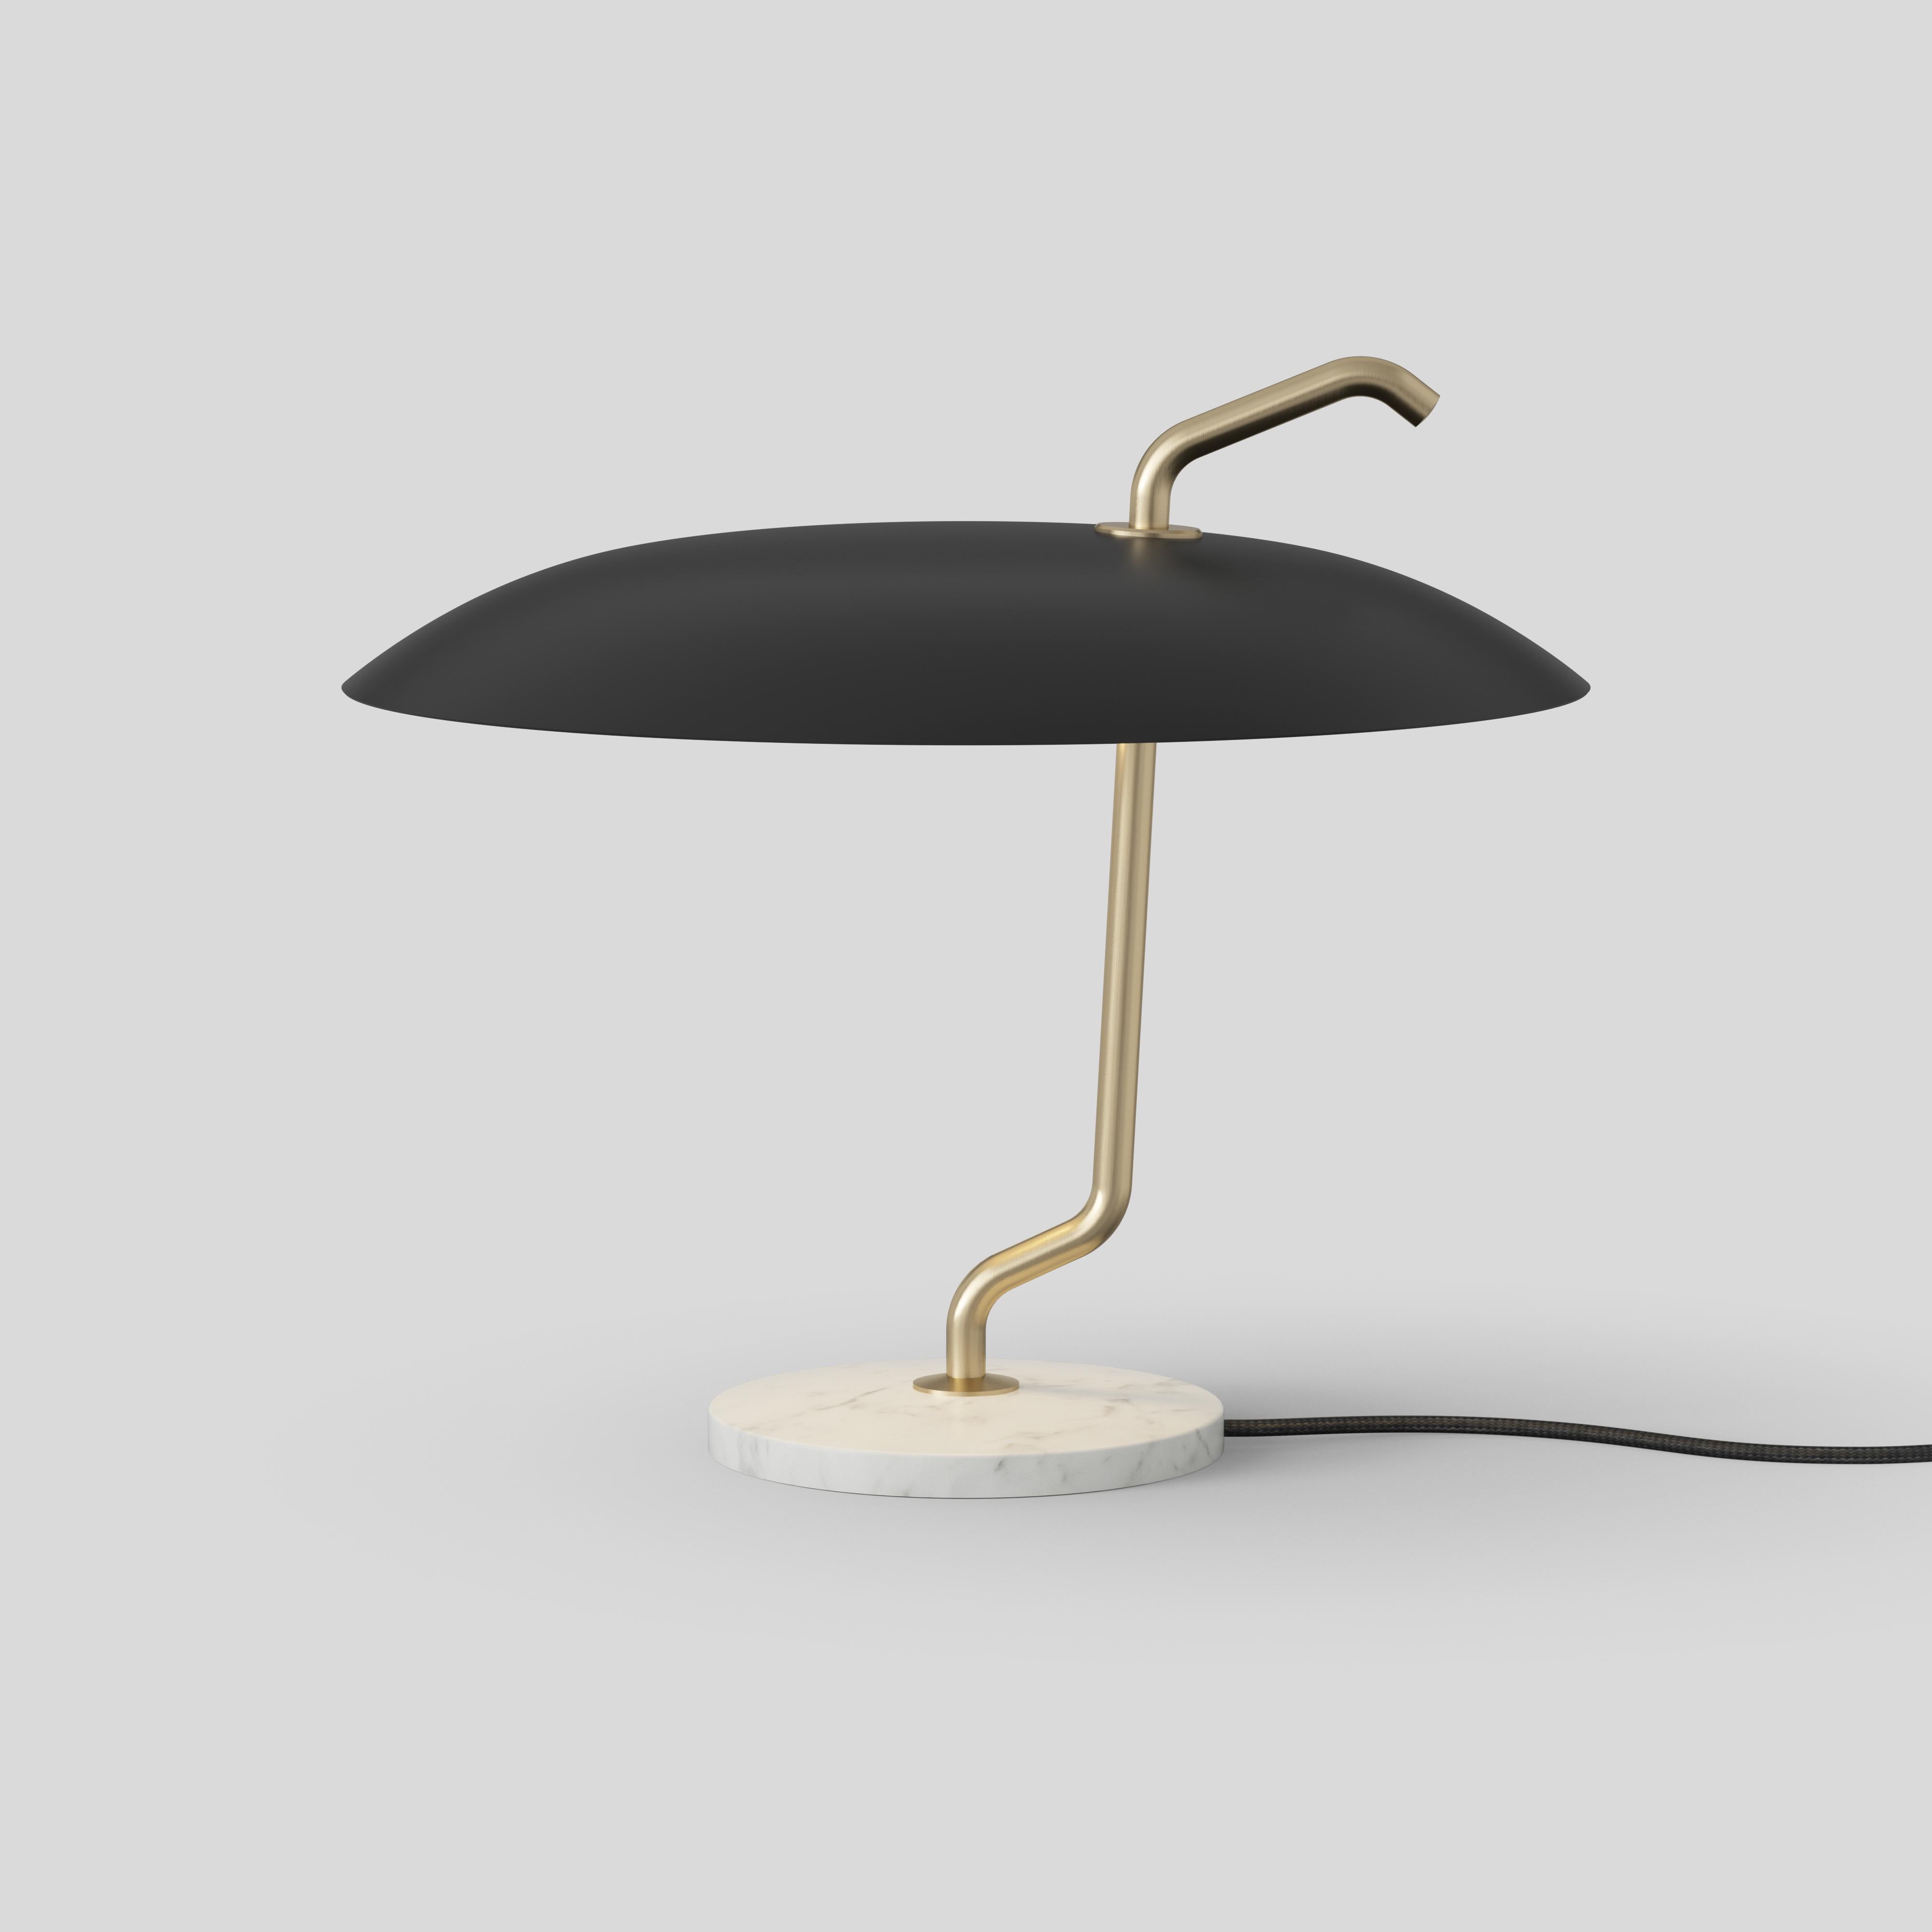 Gino Sarfatti lamp model 537.
Brass structure, black reflector, white marble.
Manufactured by Astep

Model 537
Design by Gino Sarfatti
In its refined simplicity, Model 537 stands out owing to the combination of rich materials and ingenious,